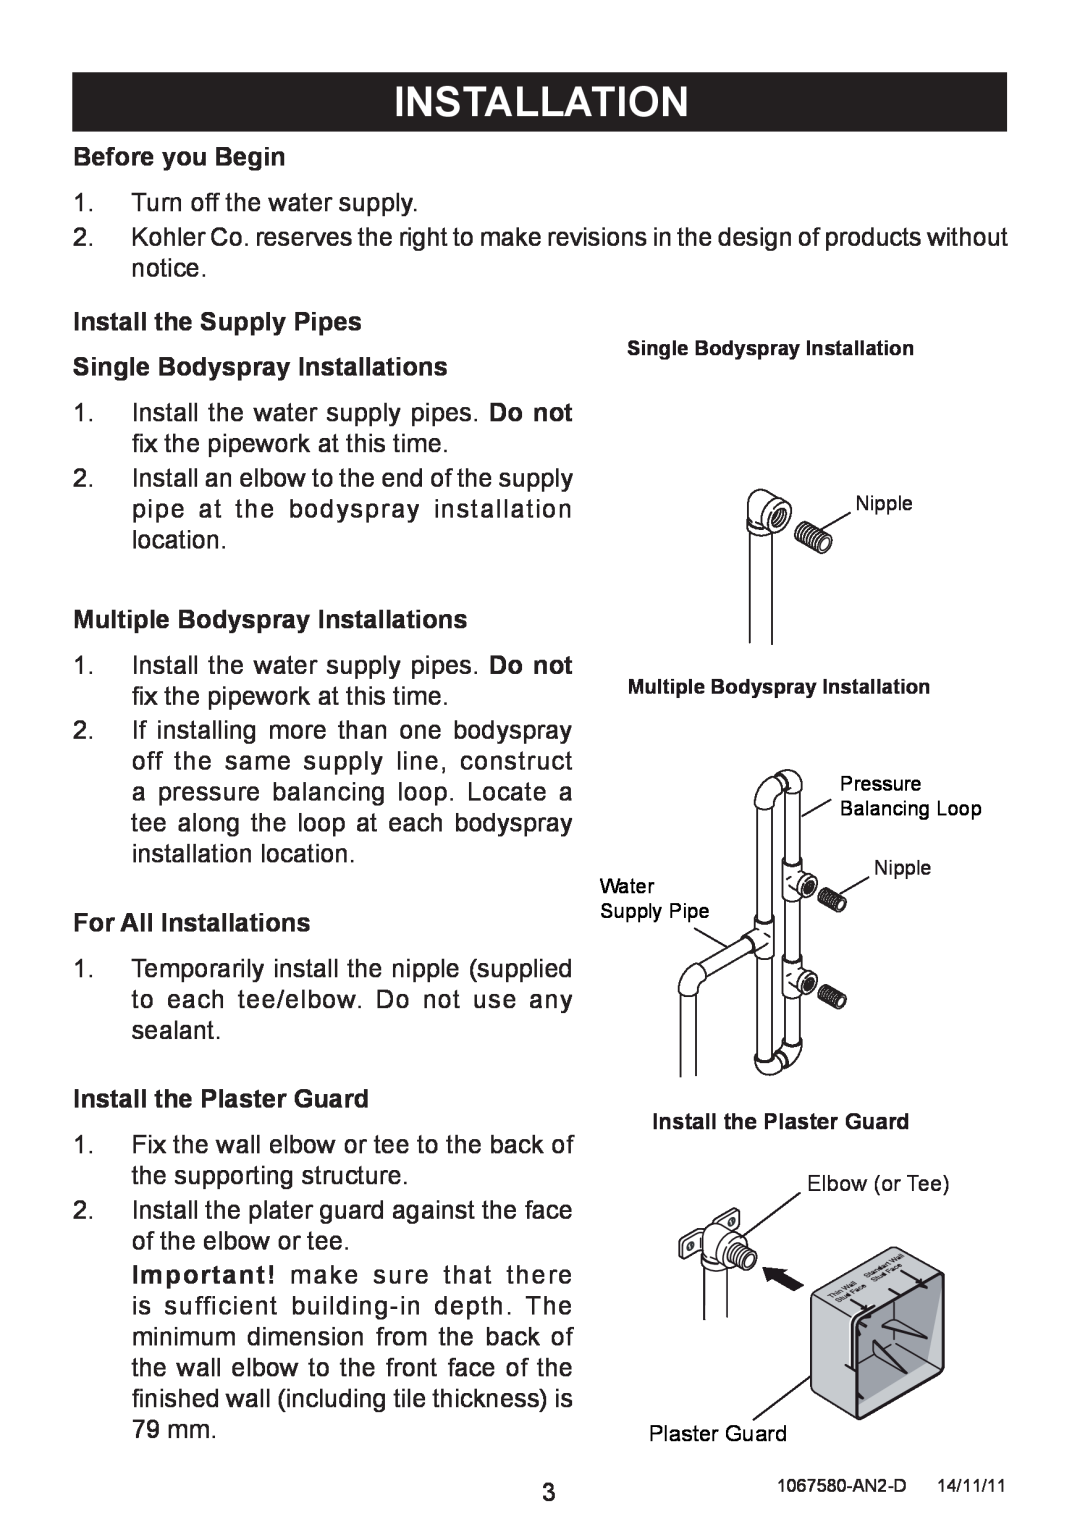 Kohler 8002A manual Before you Begin, Install the Supply Pipes, Single Bodyspray Installations, For All Installations 